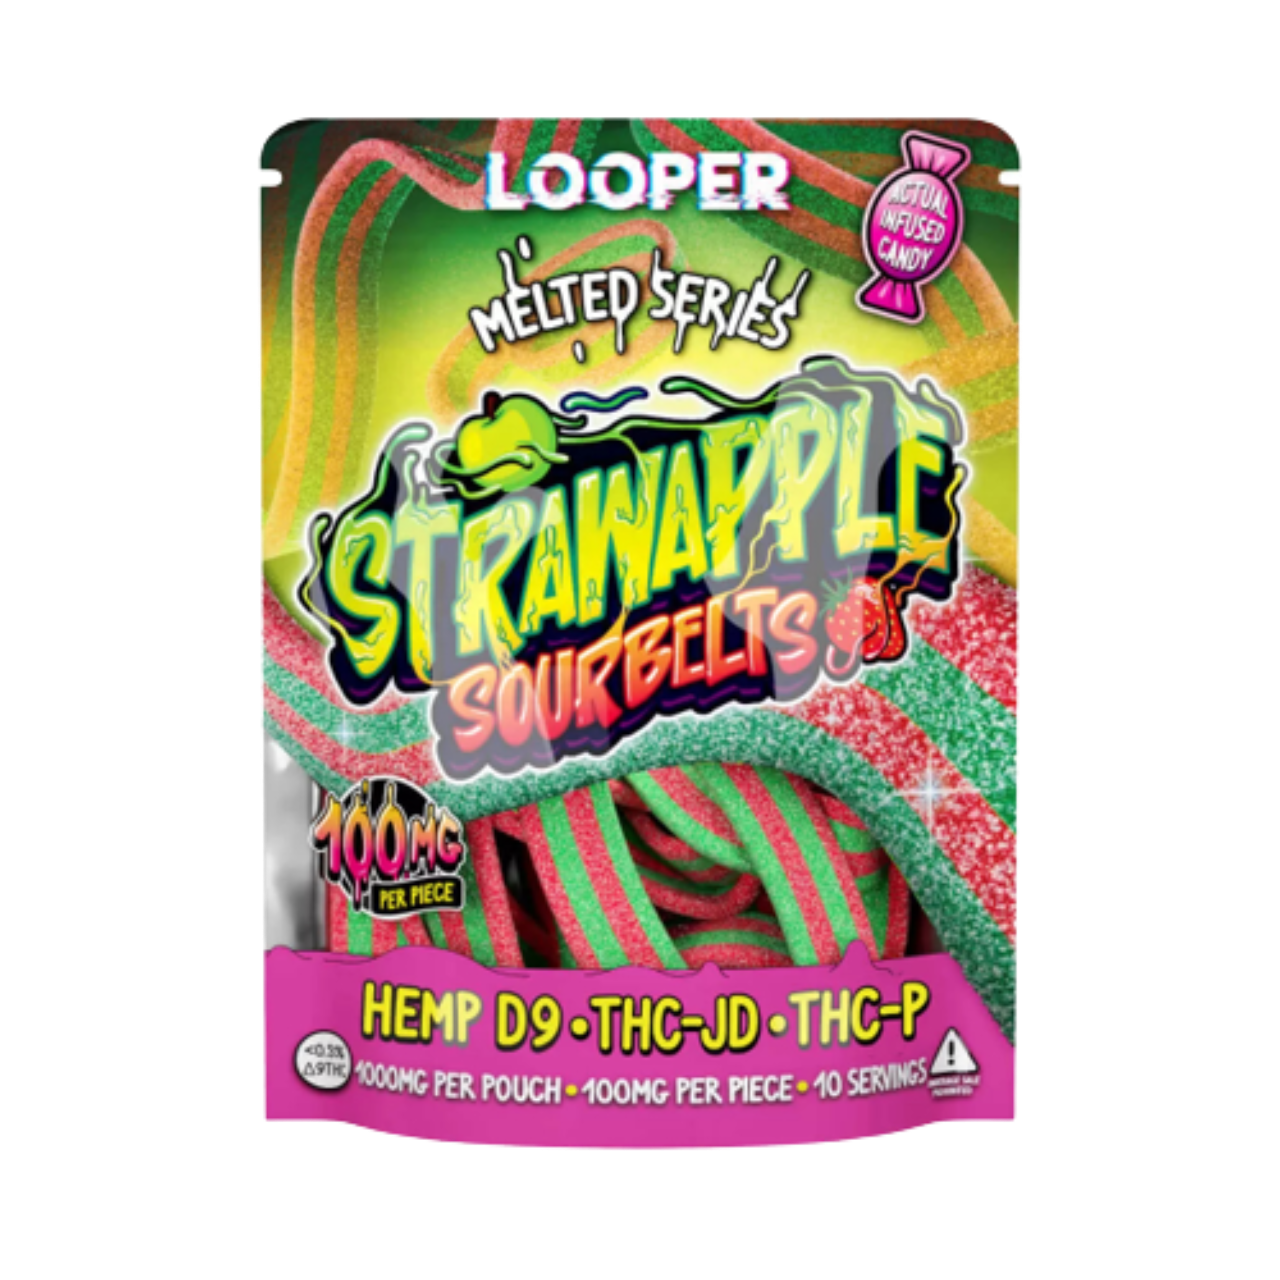 Looper Melted Series Delta 9 THC-JD THC-P 1000MG Sour Belts